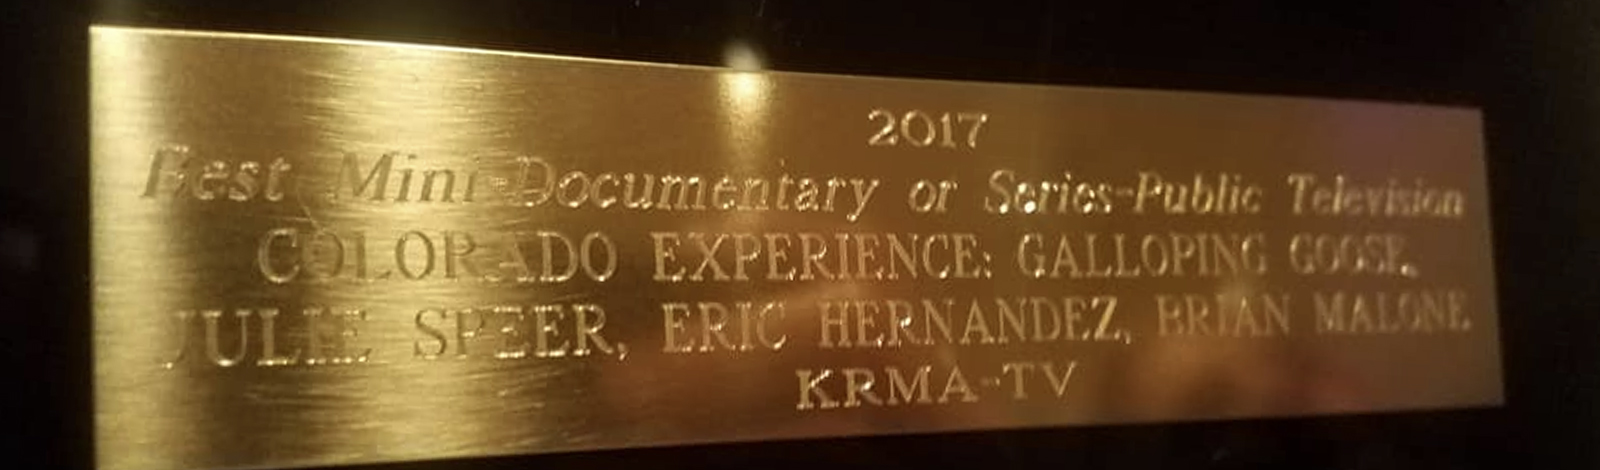 Colorado Broadcasters Association Award of Excellence for Best Public Television Documentary